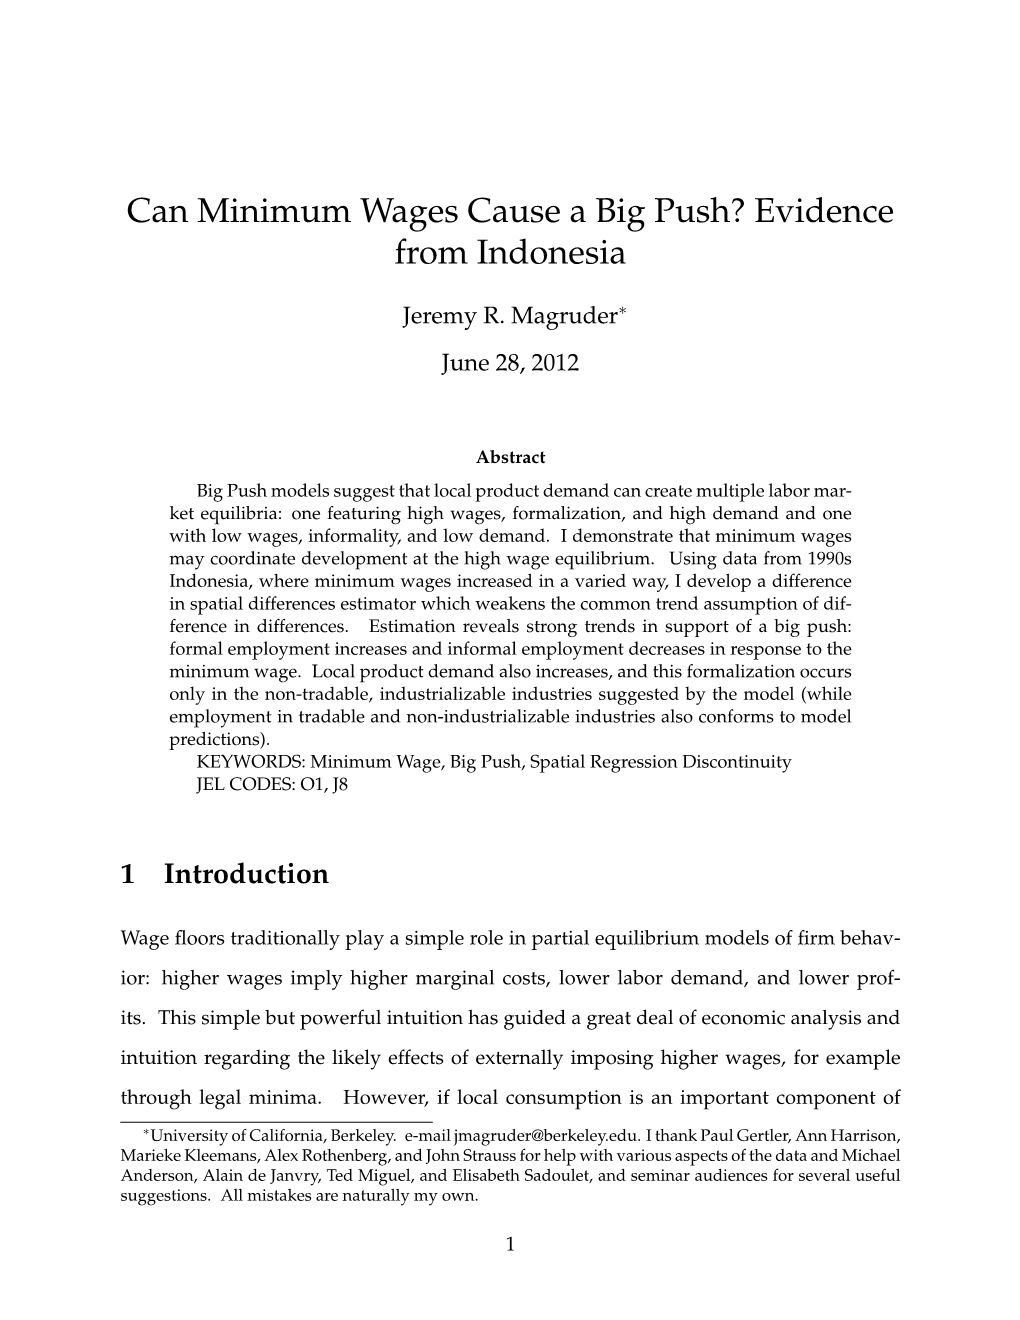 Can Minimum Wages Cause a Big Push? Evidence from Indonesia